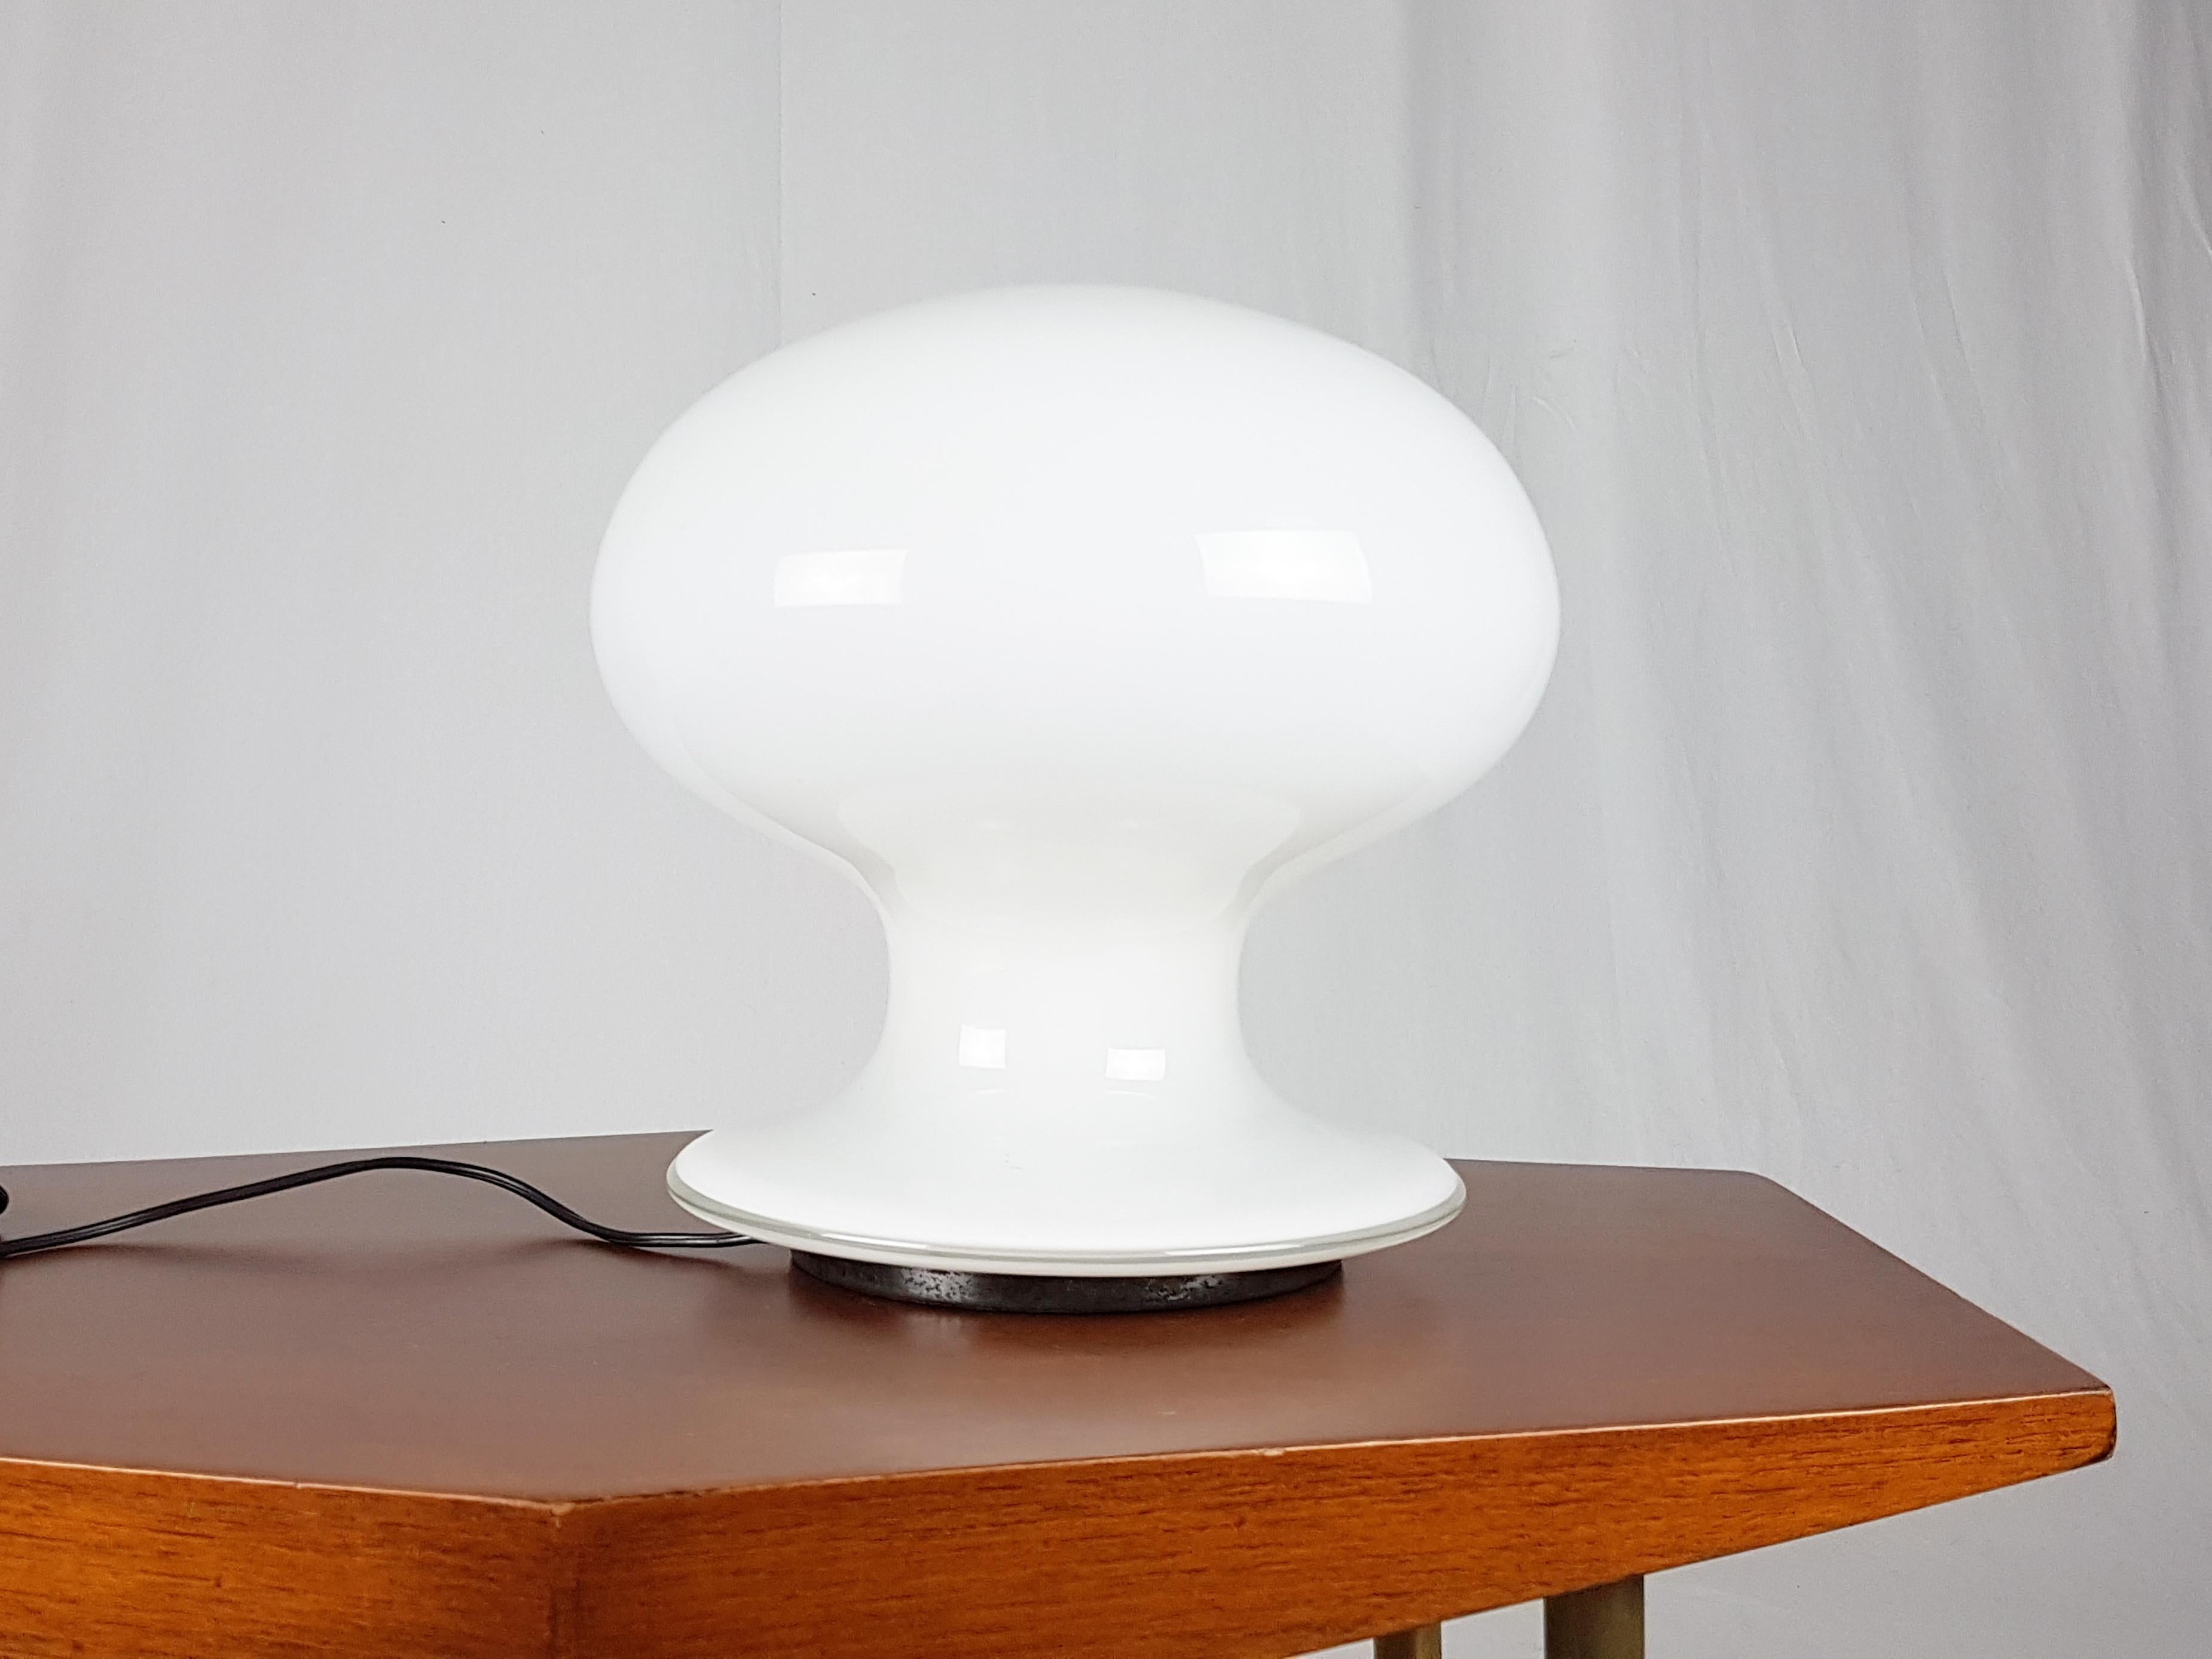 Rare table lamp made from murano glass and burnished metal base. The lamp was produced in the 1960s by the famous Italian glasswork Vistosi.
The body shade is white and features a clear glass edge next to the base.
Original electrical system and